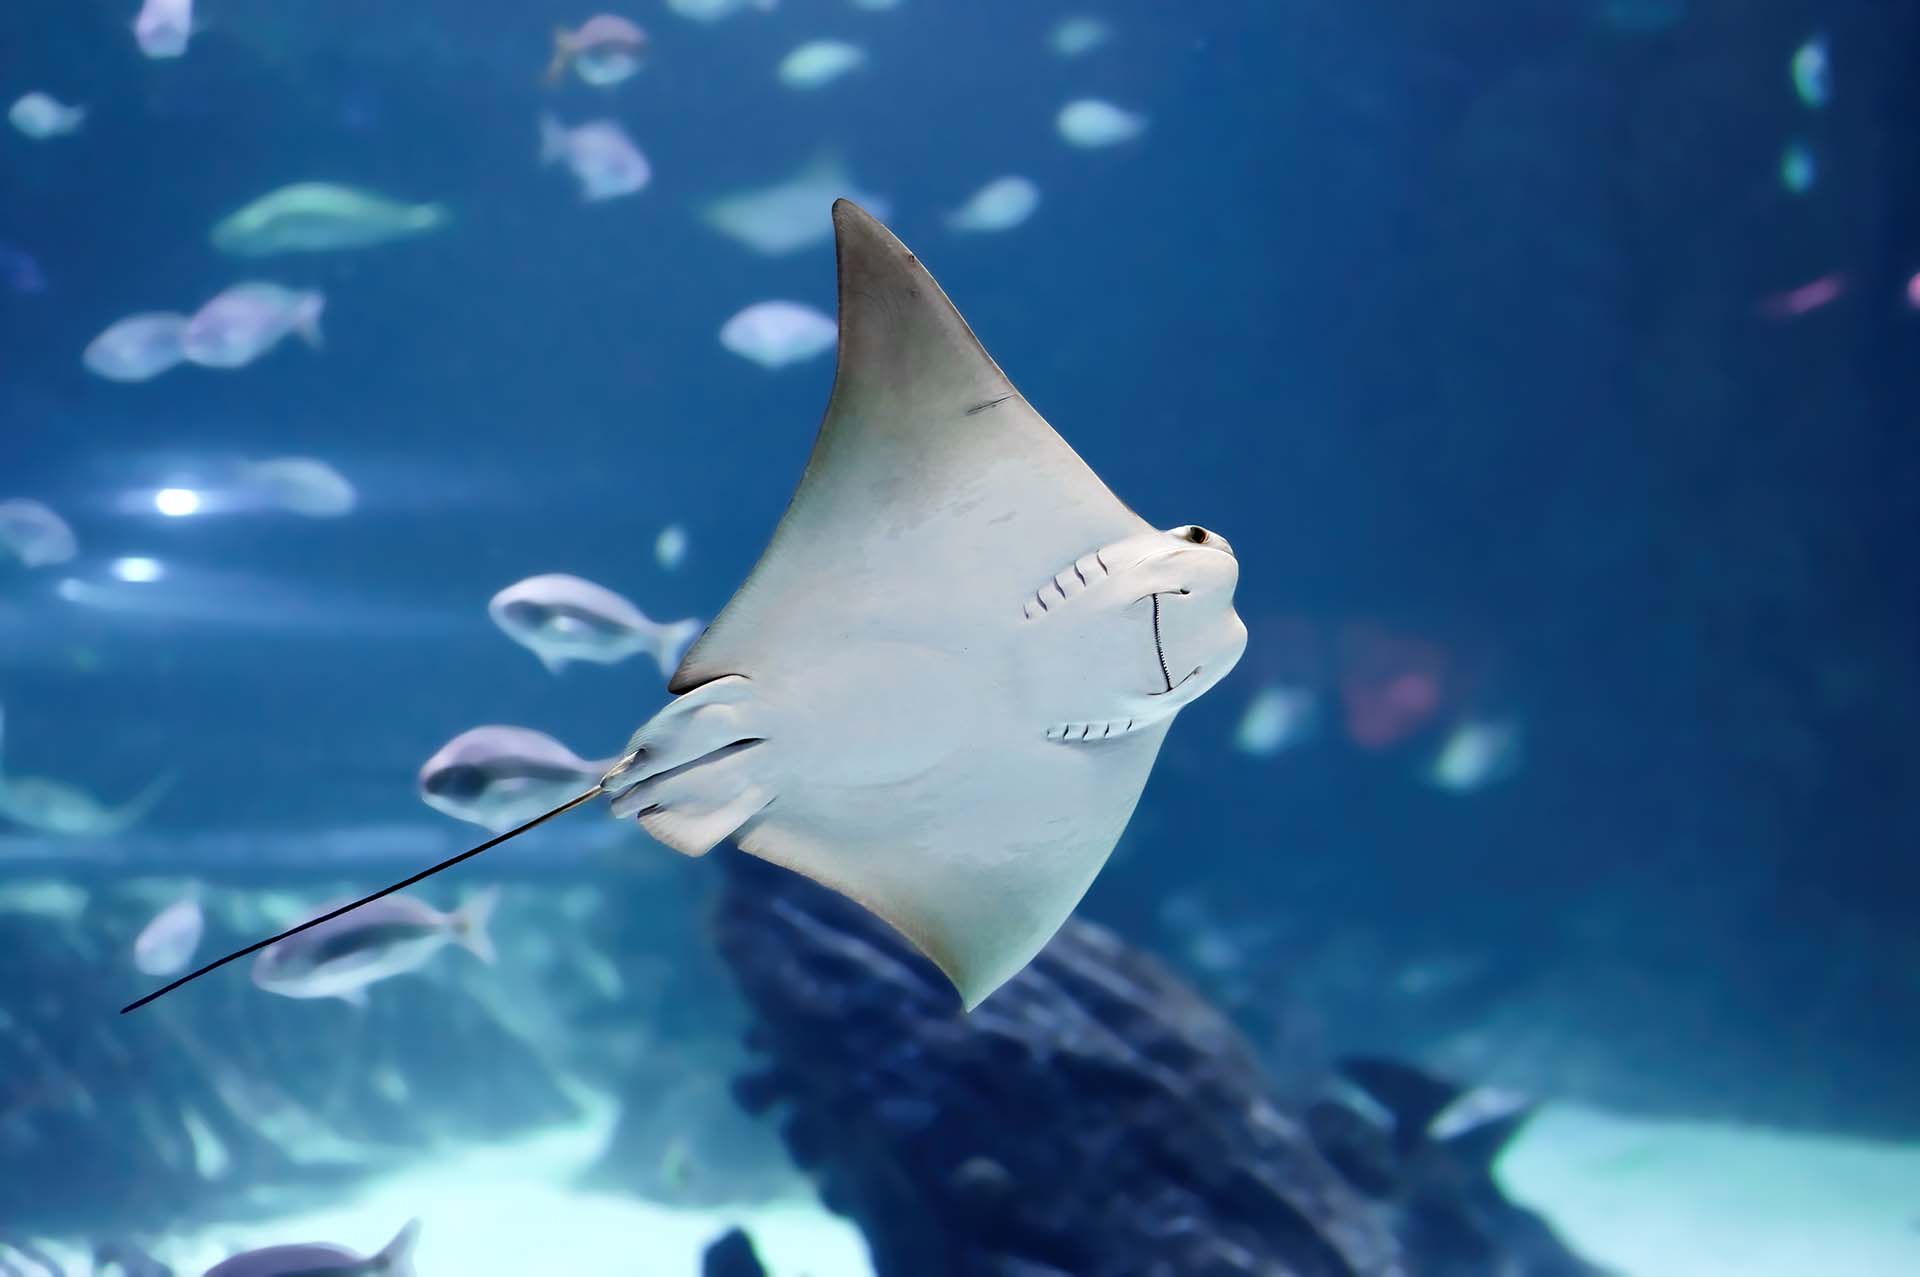 Stingray fish showing its mouth